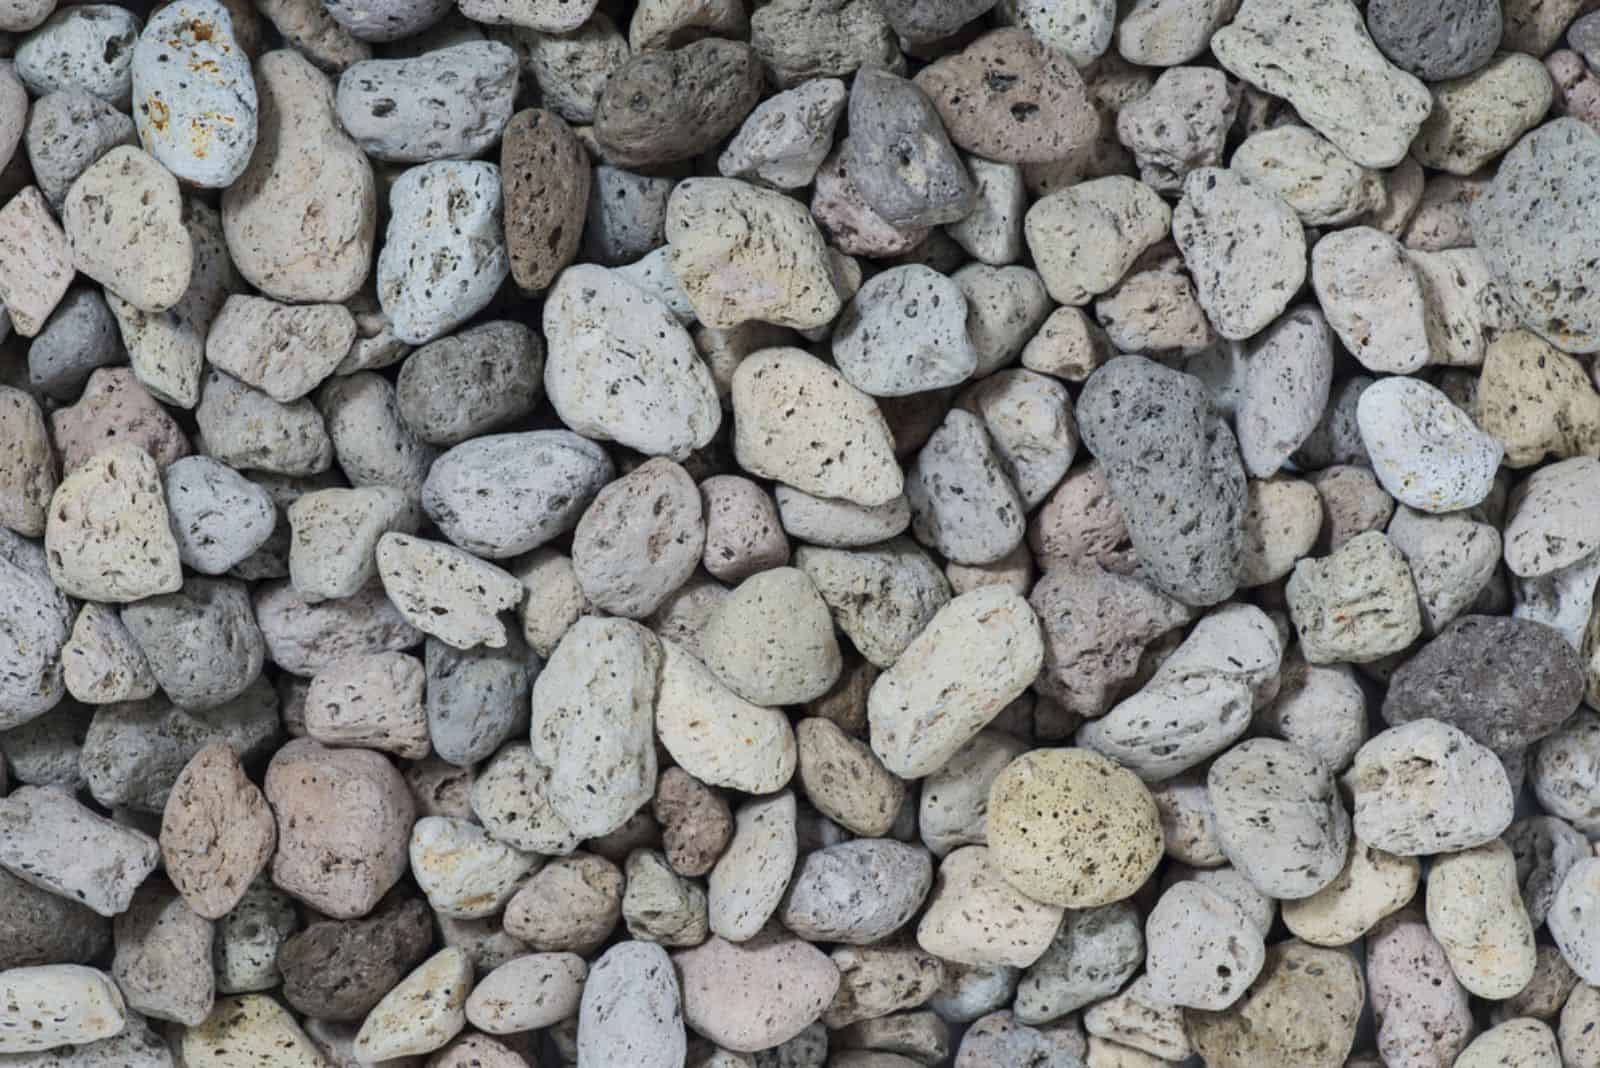 Pumice stones in various colors